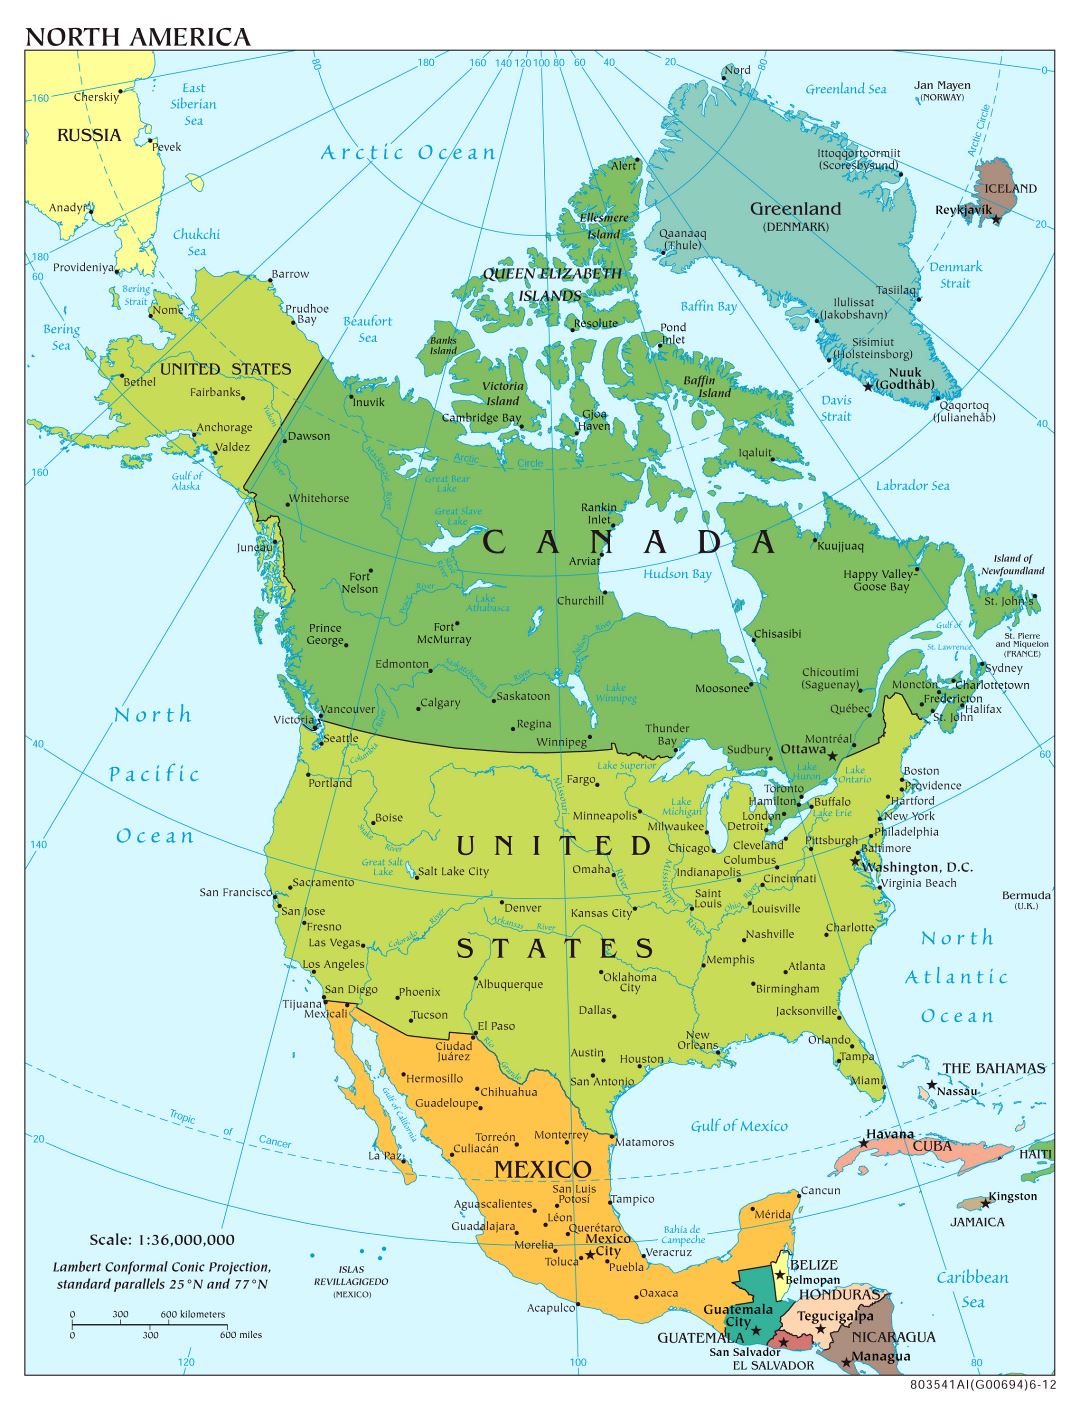 Large scale political map of North America with major cities and capitals - 2012